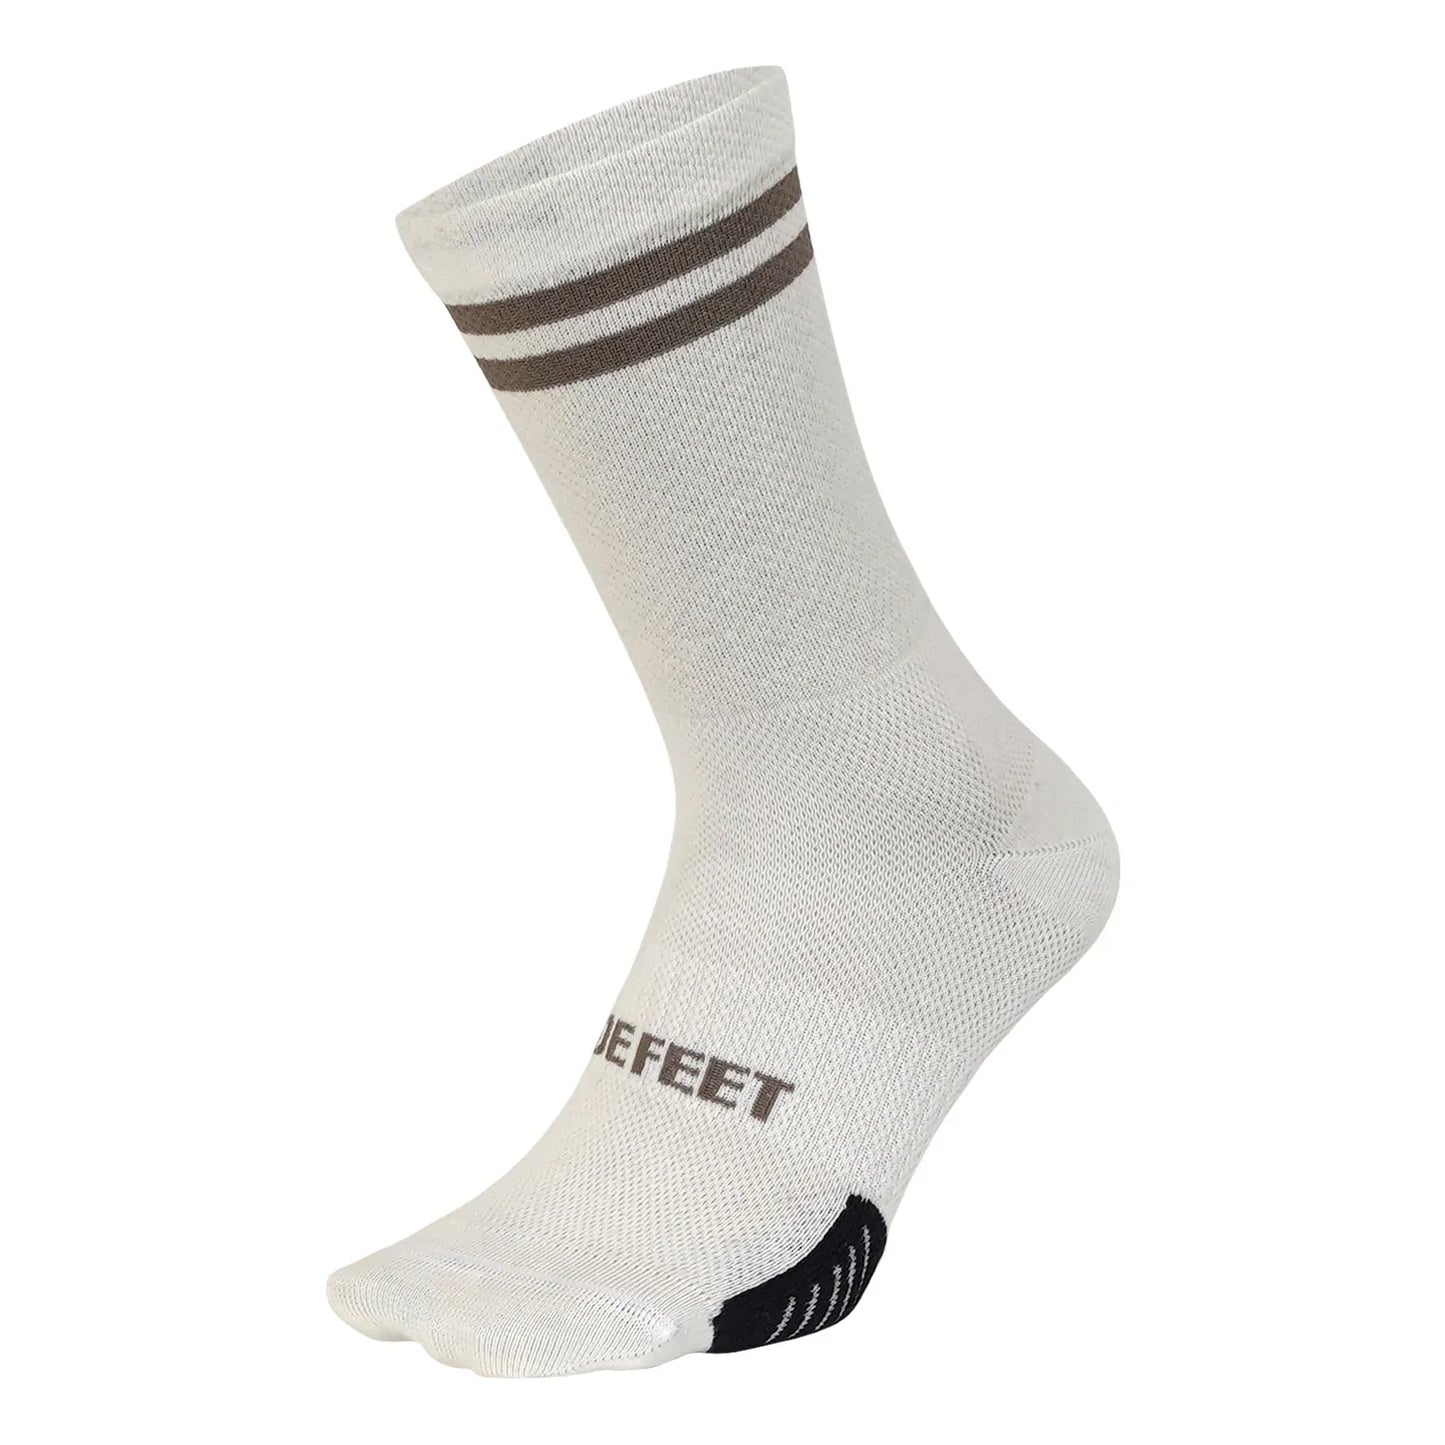 merino wool blend DeFeet cycling sock in natural/white with a double brown stripe on the cuff